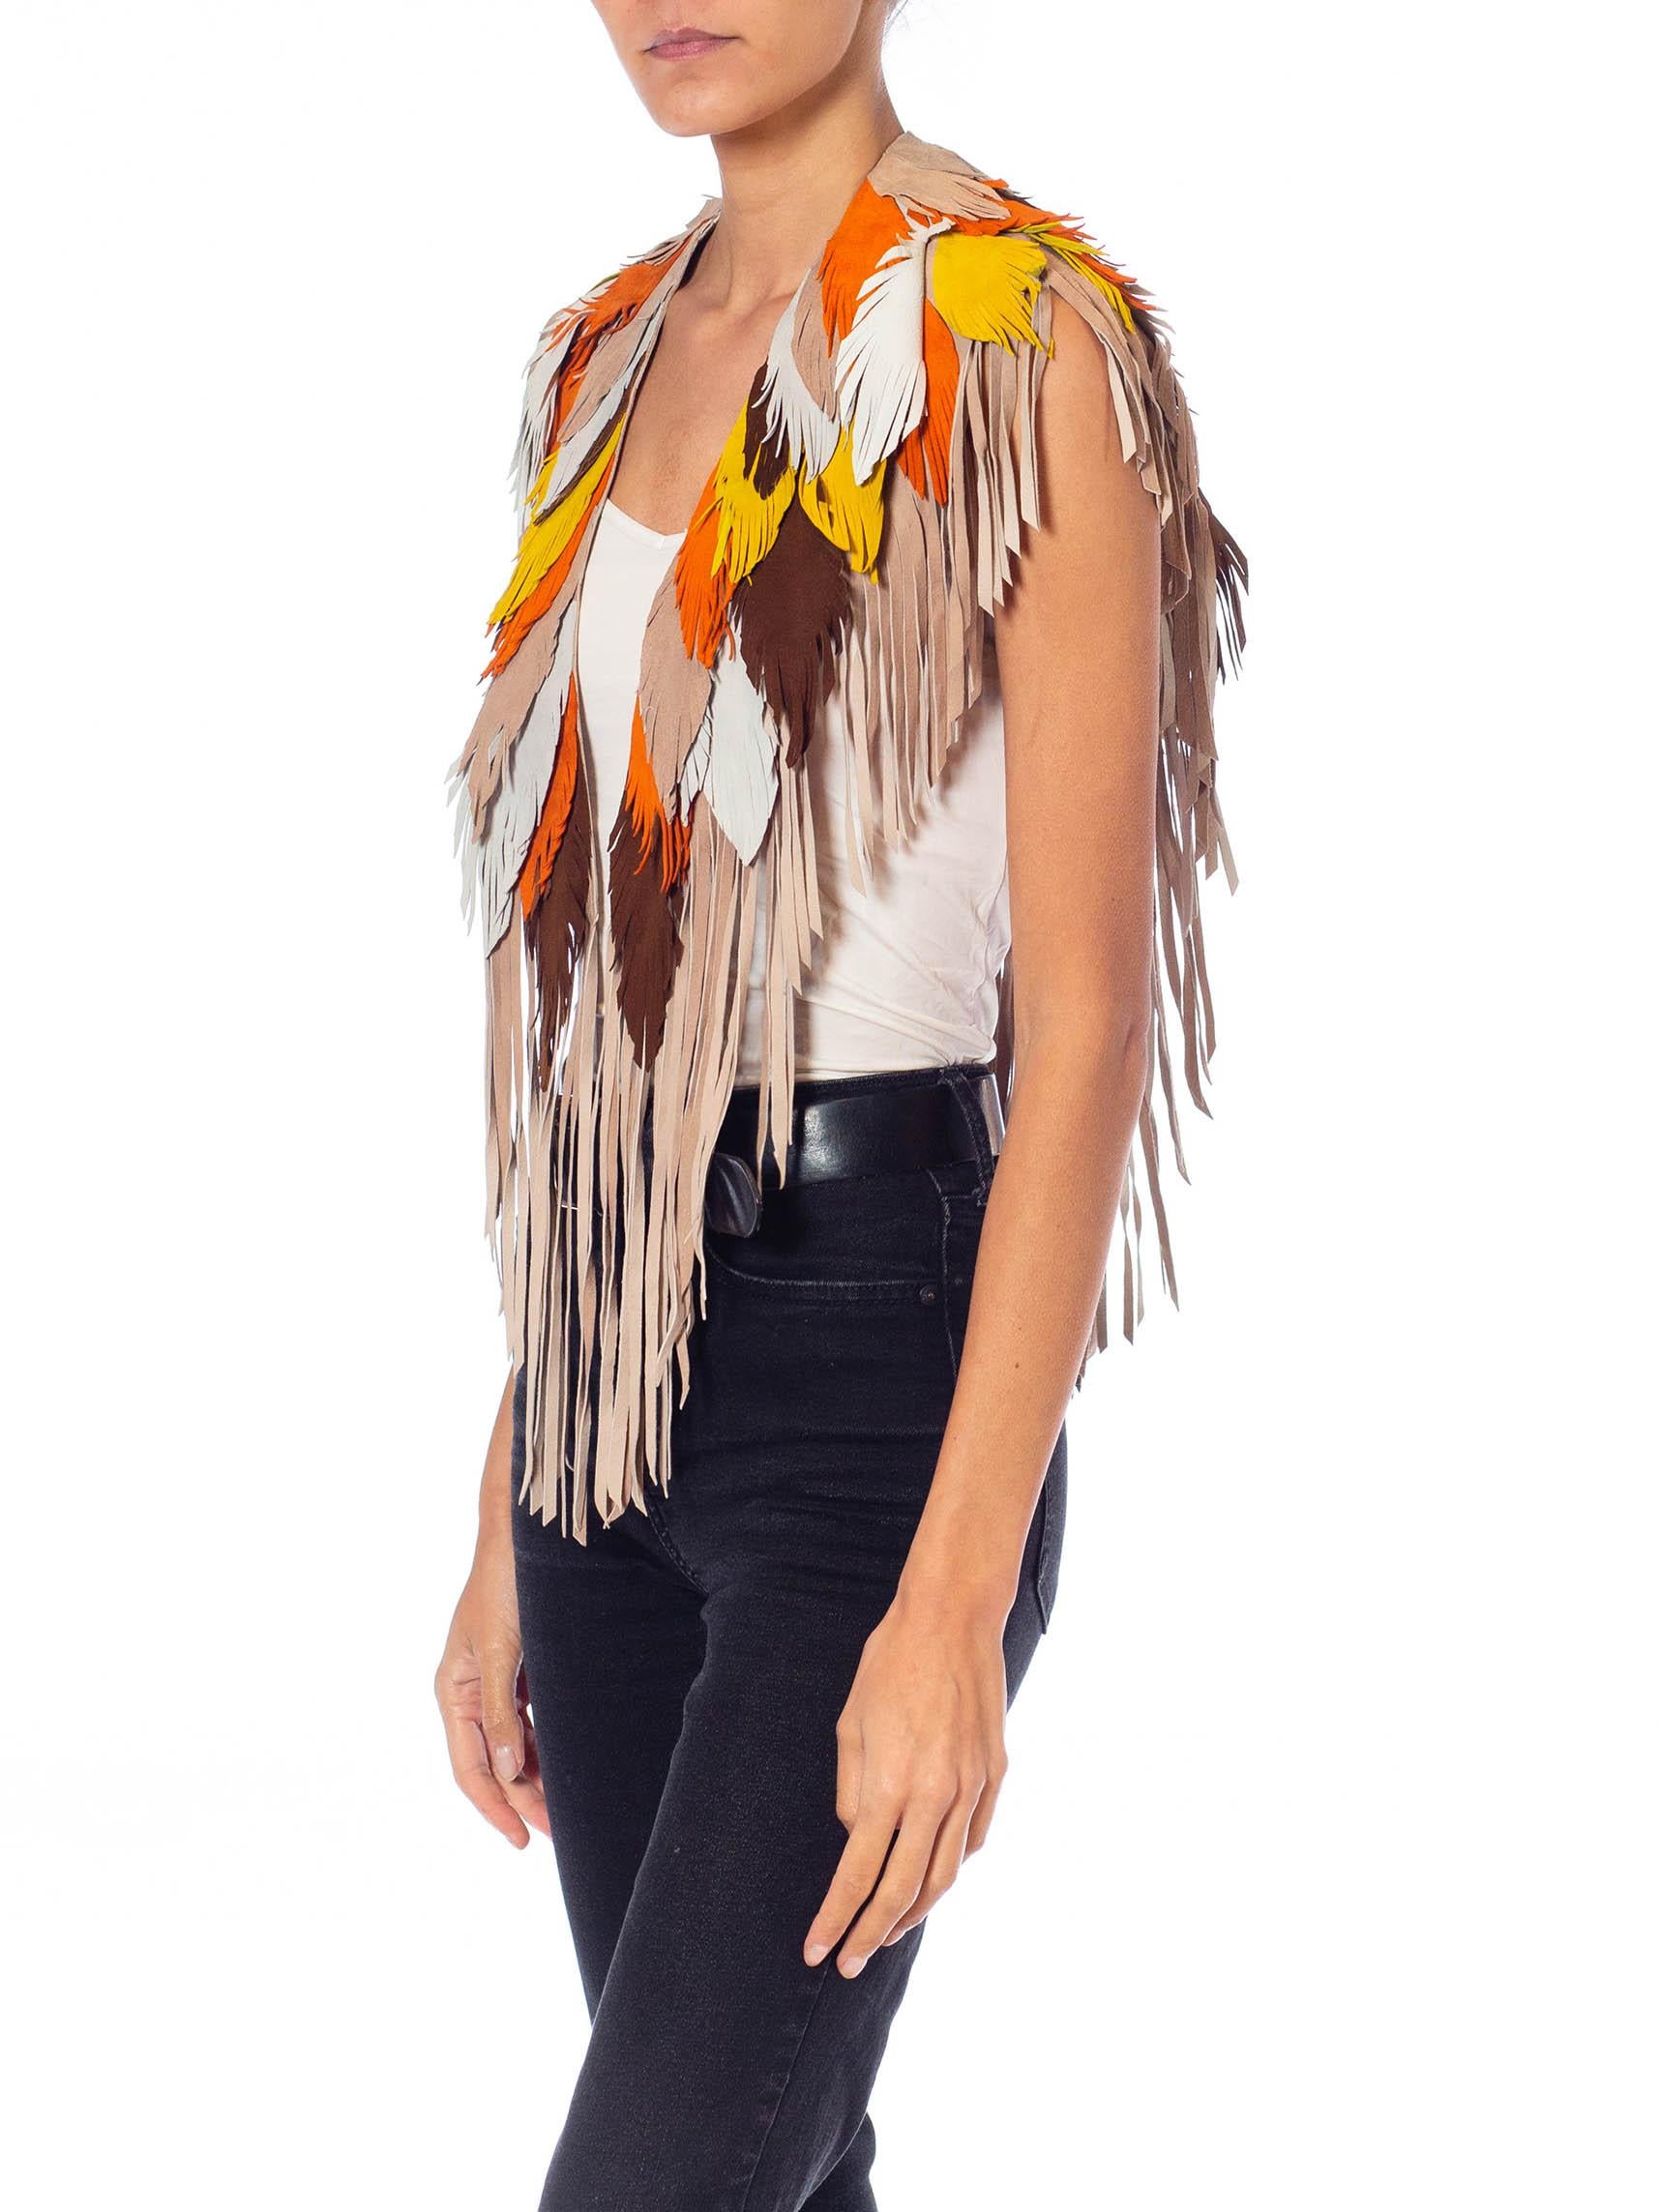 MORPHEW COLLECTION Phoenix Sunset Suede Fringe Feather Leather Cape For Sale 4